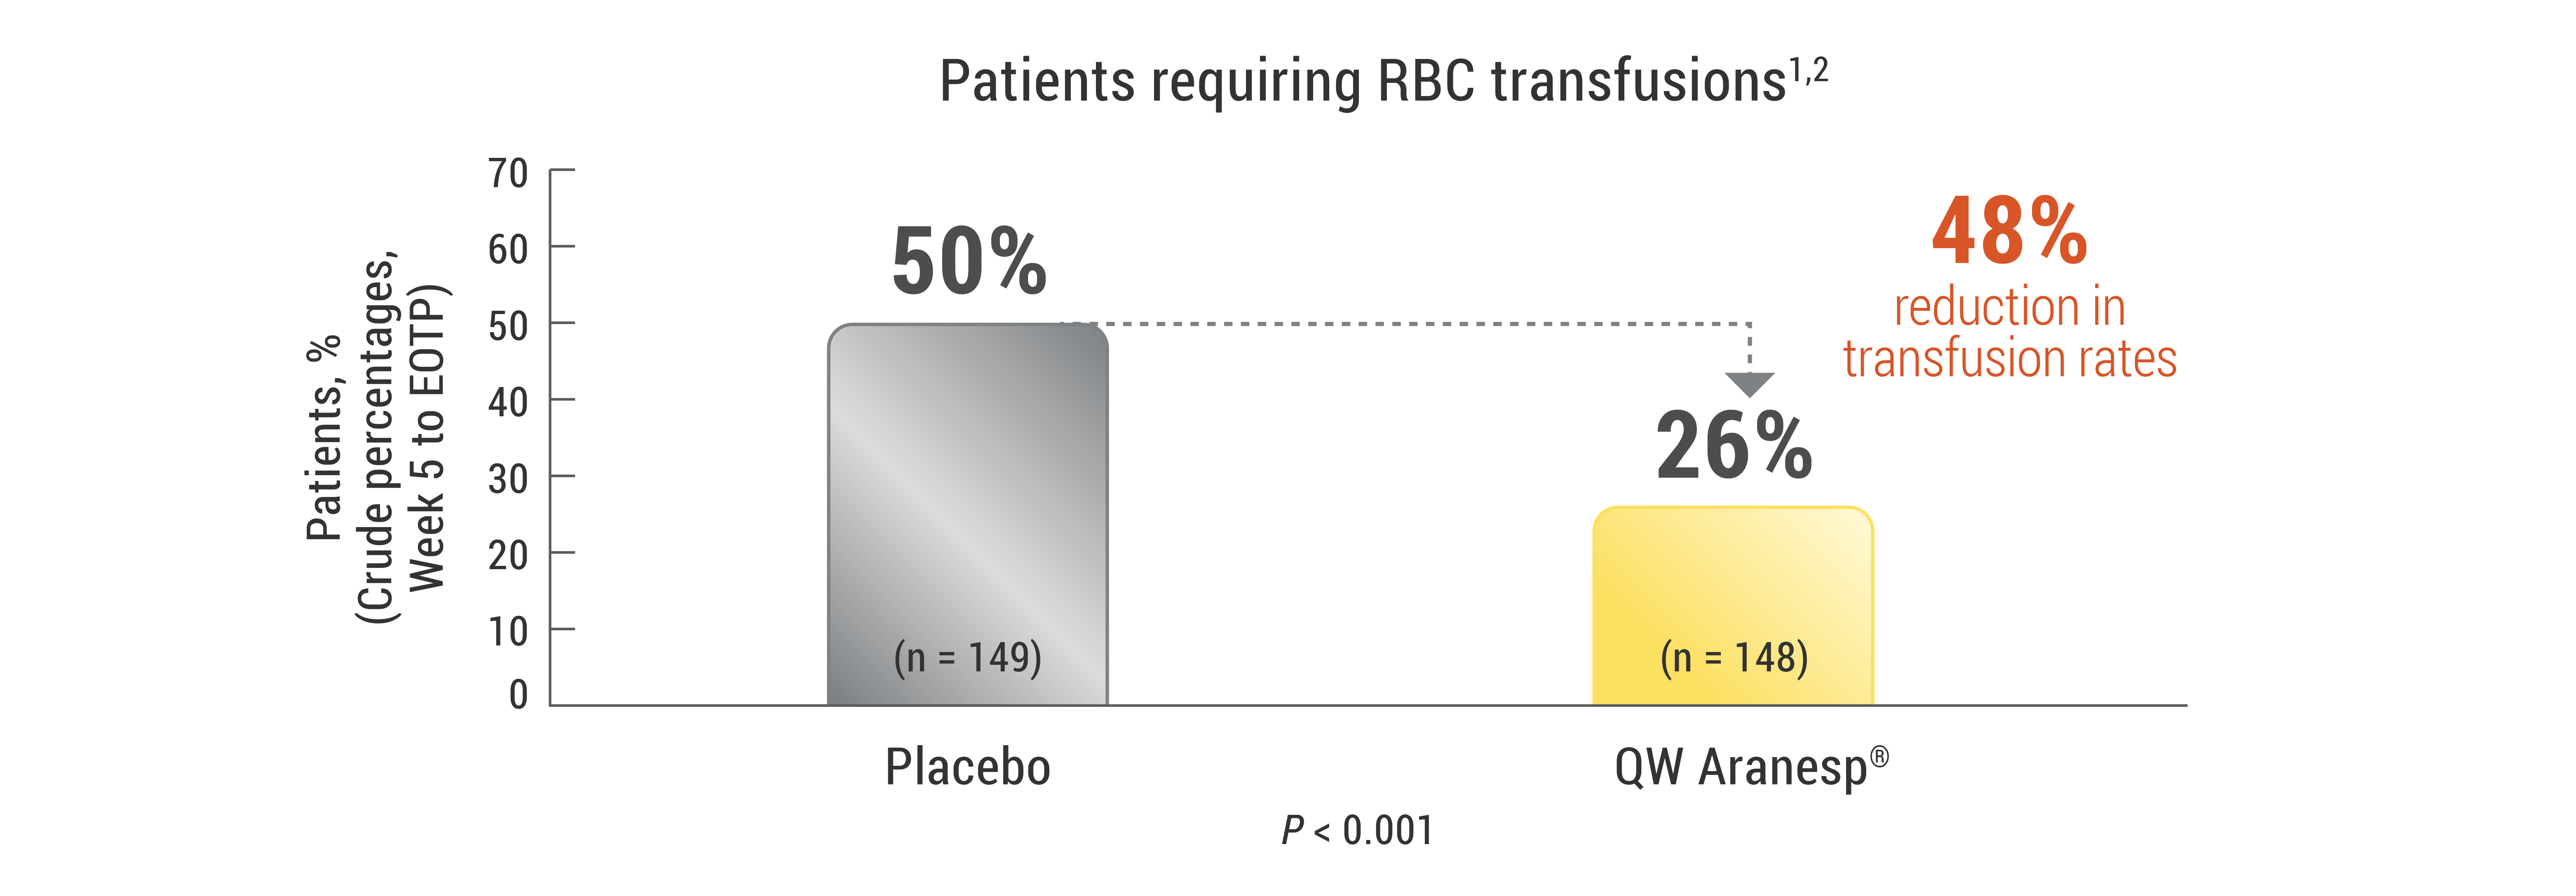 Aranesp® (darbepoetin alfa) reduced the need for red blood cell transfusions vs placebo.